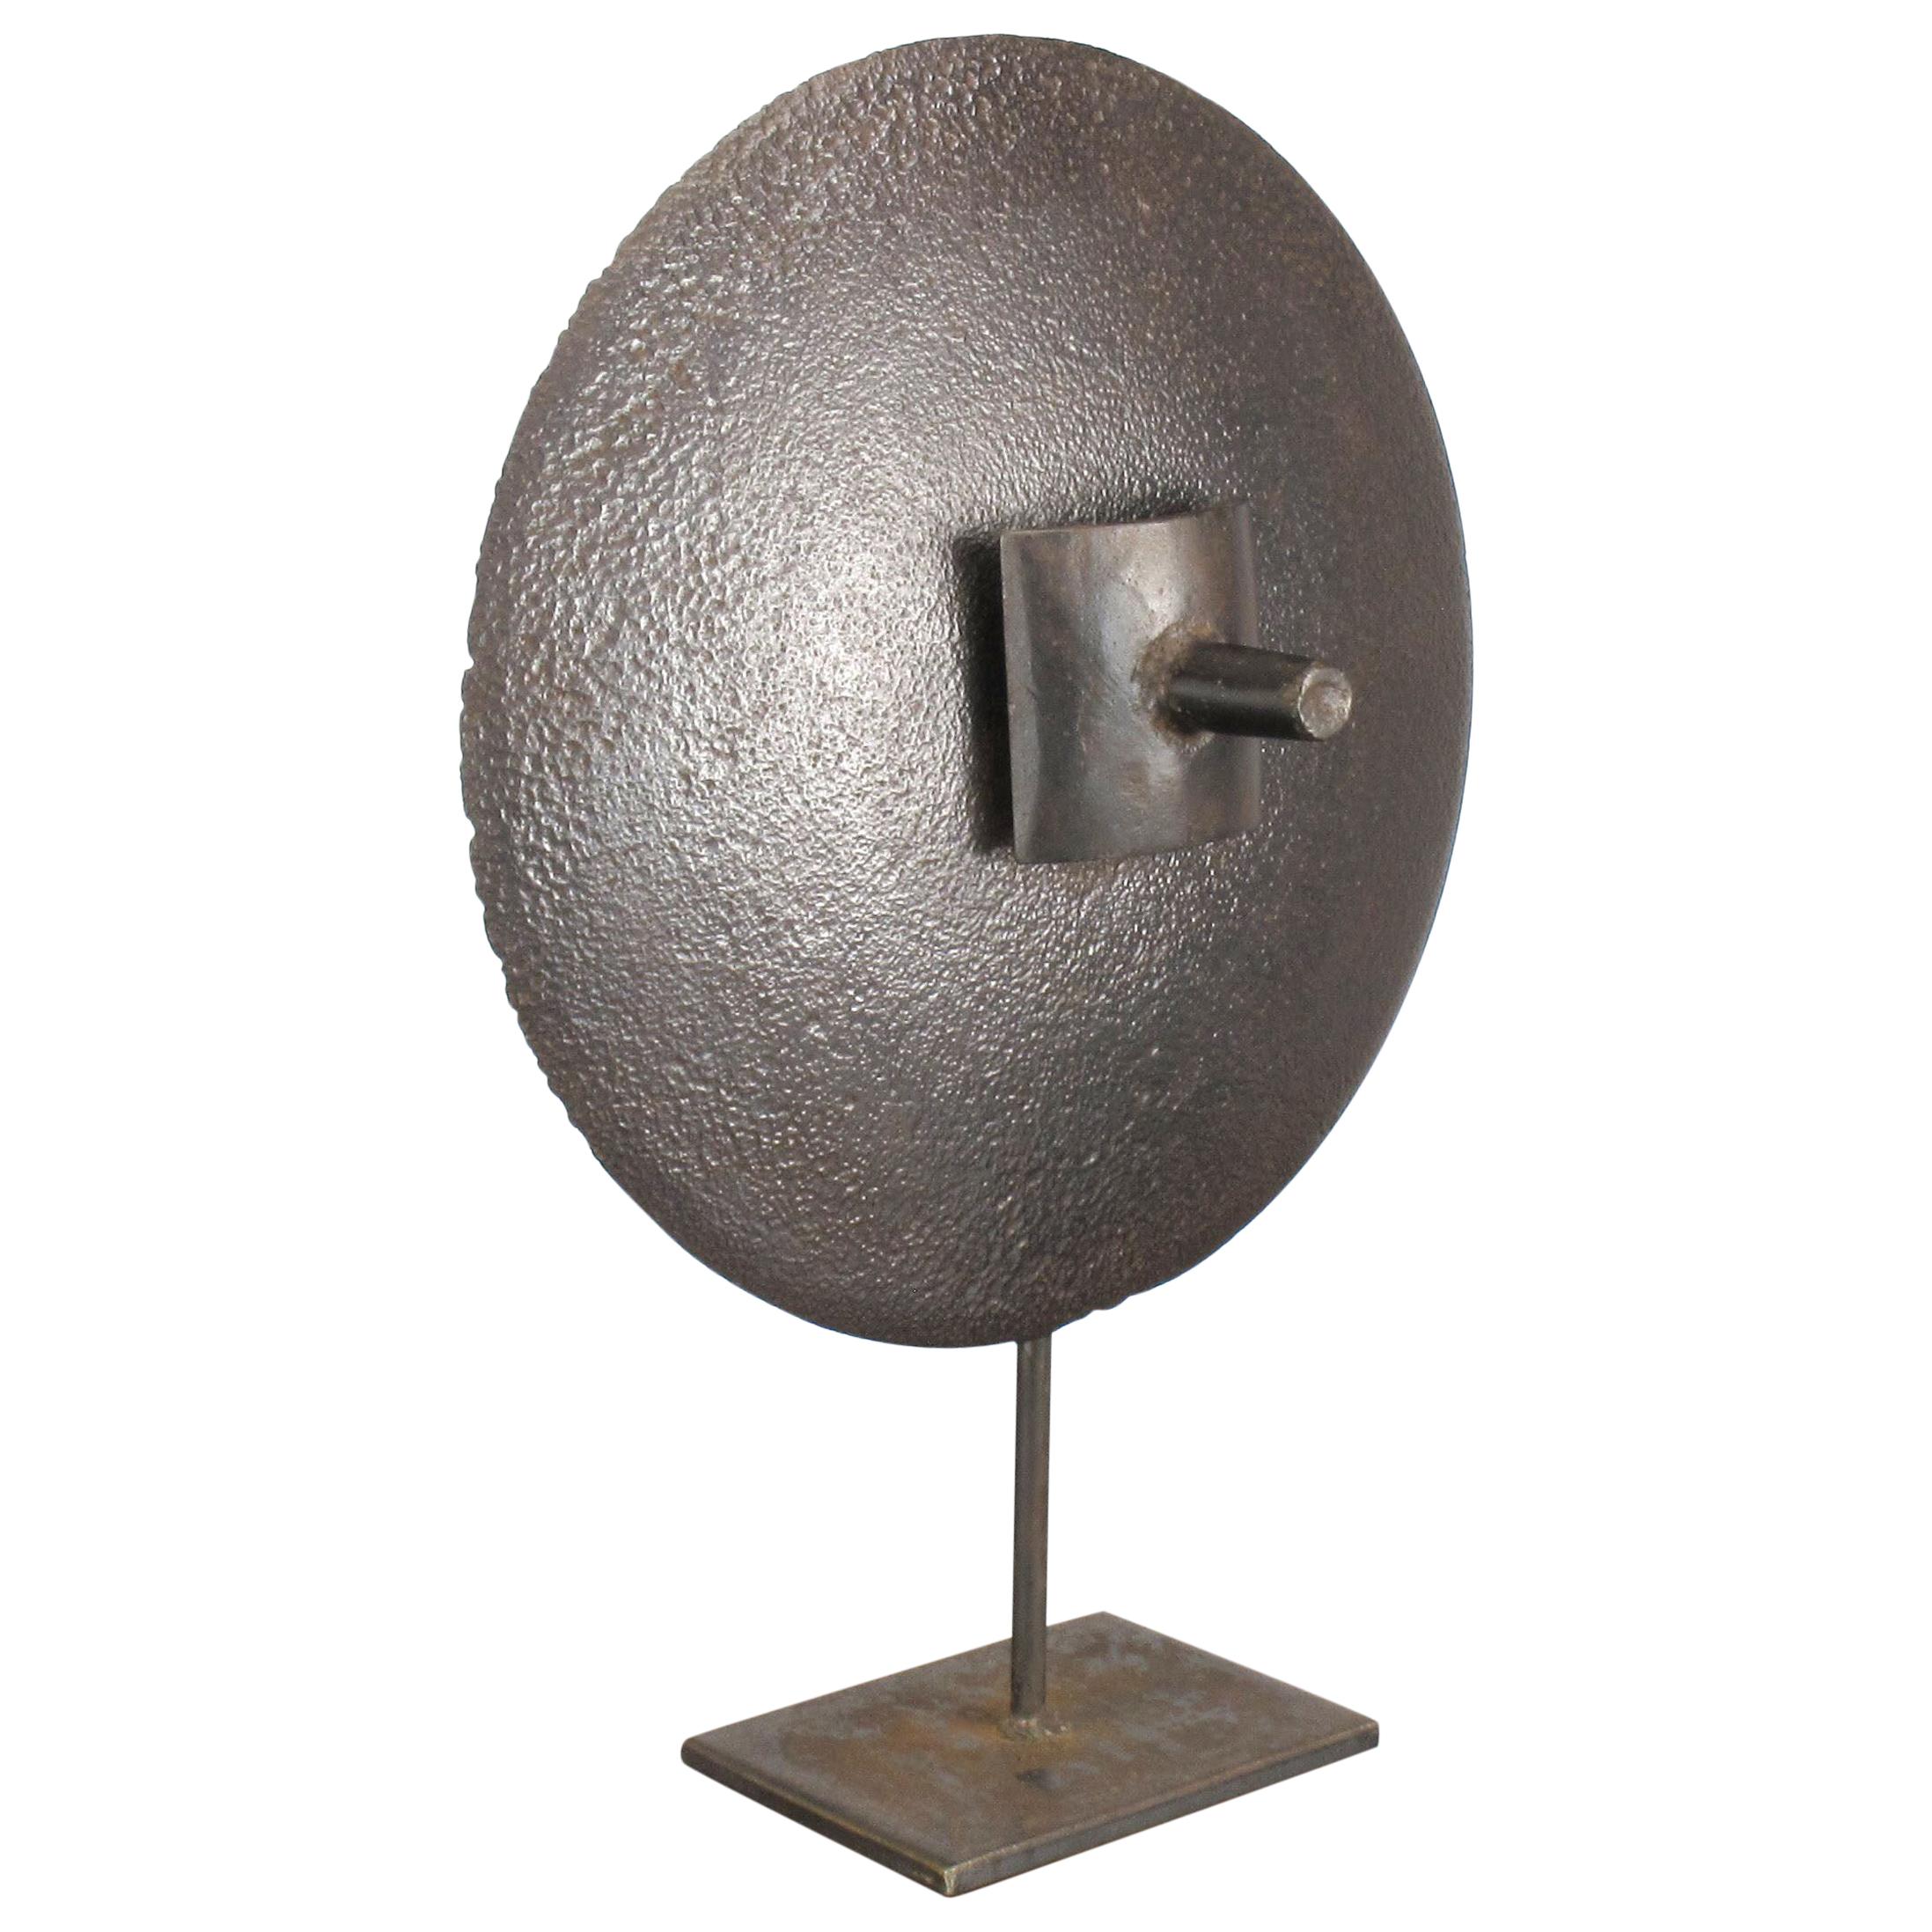 Hand-Hammered Iron Disc Sculpture with Center Handle